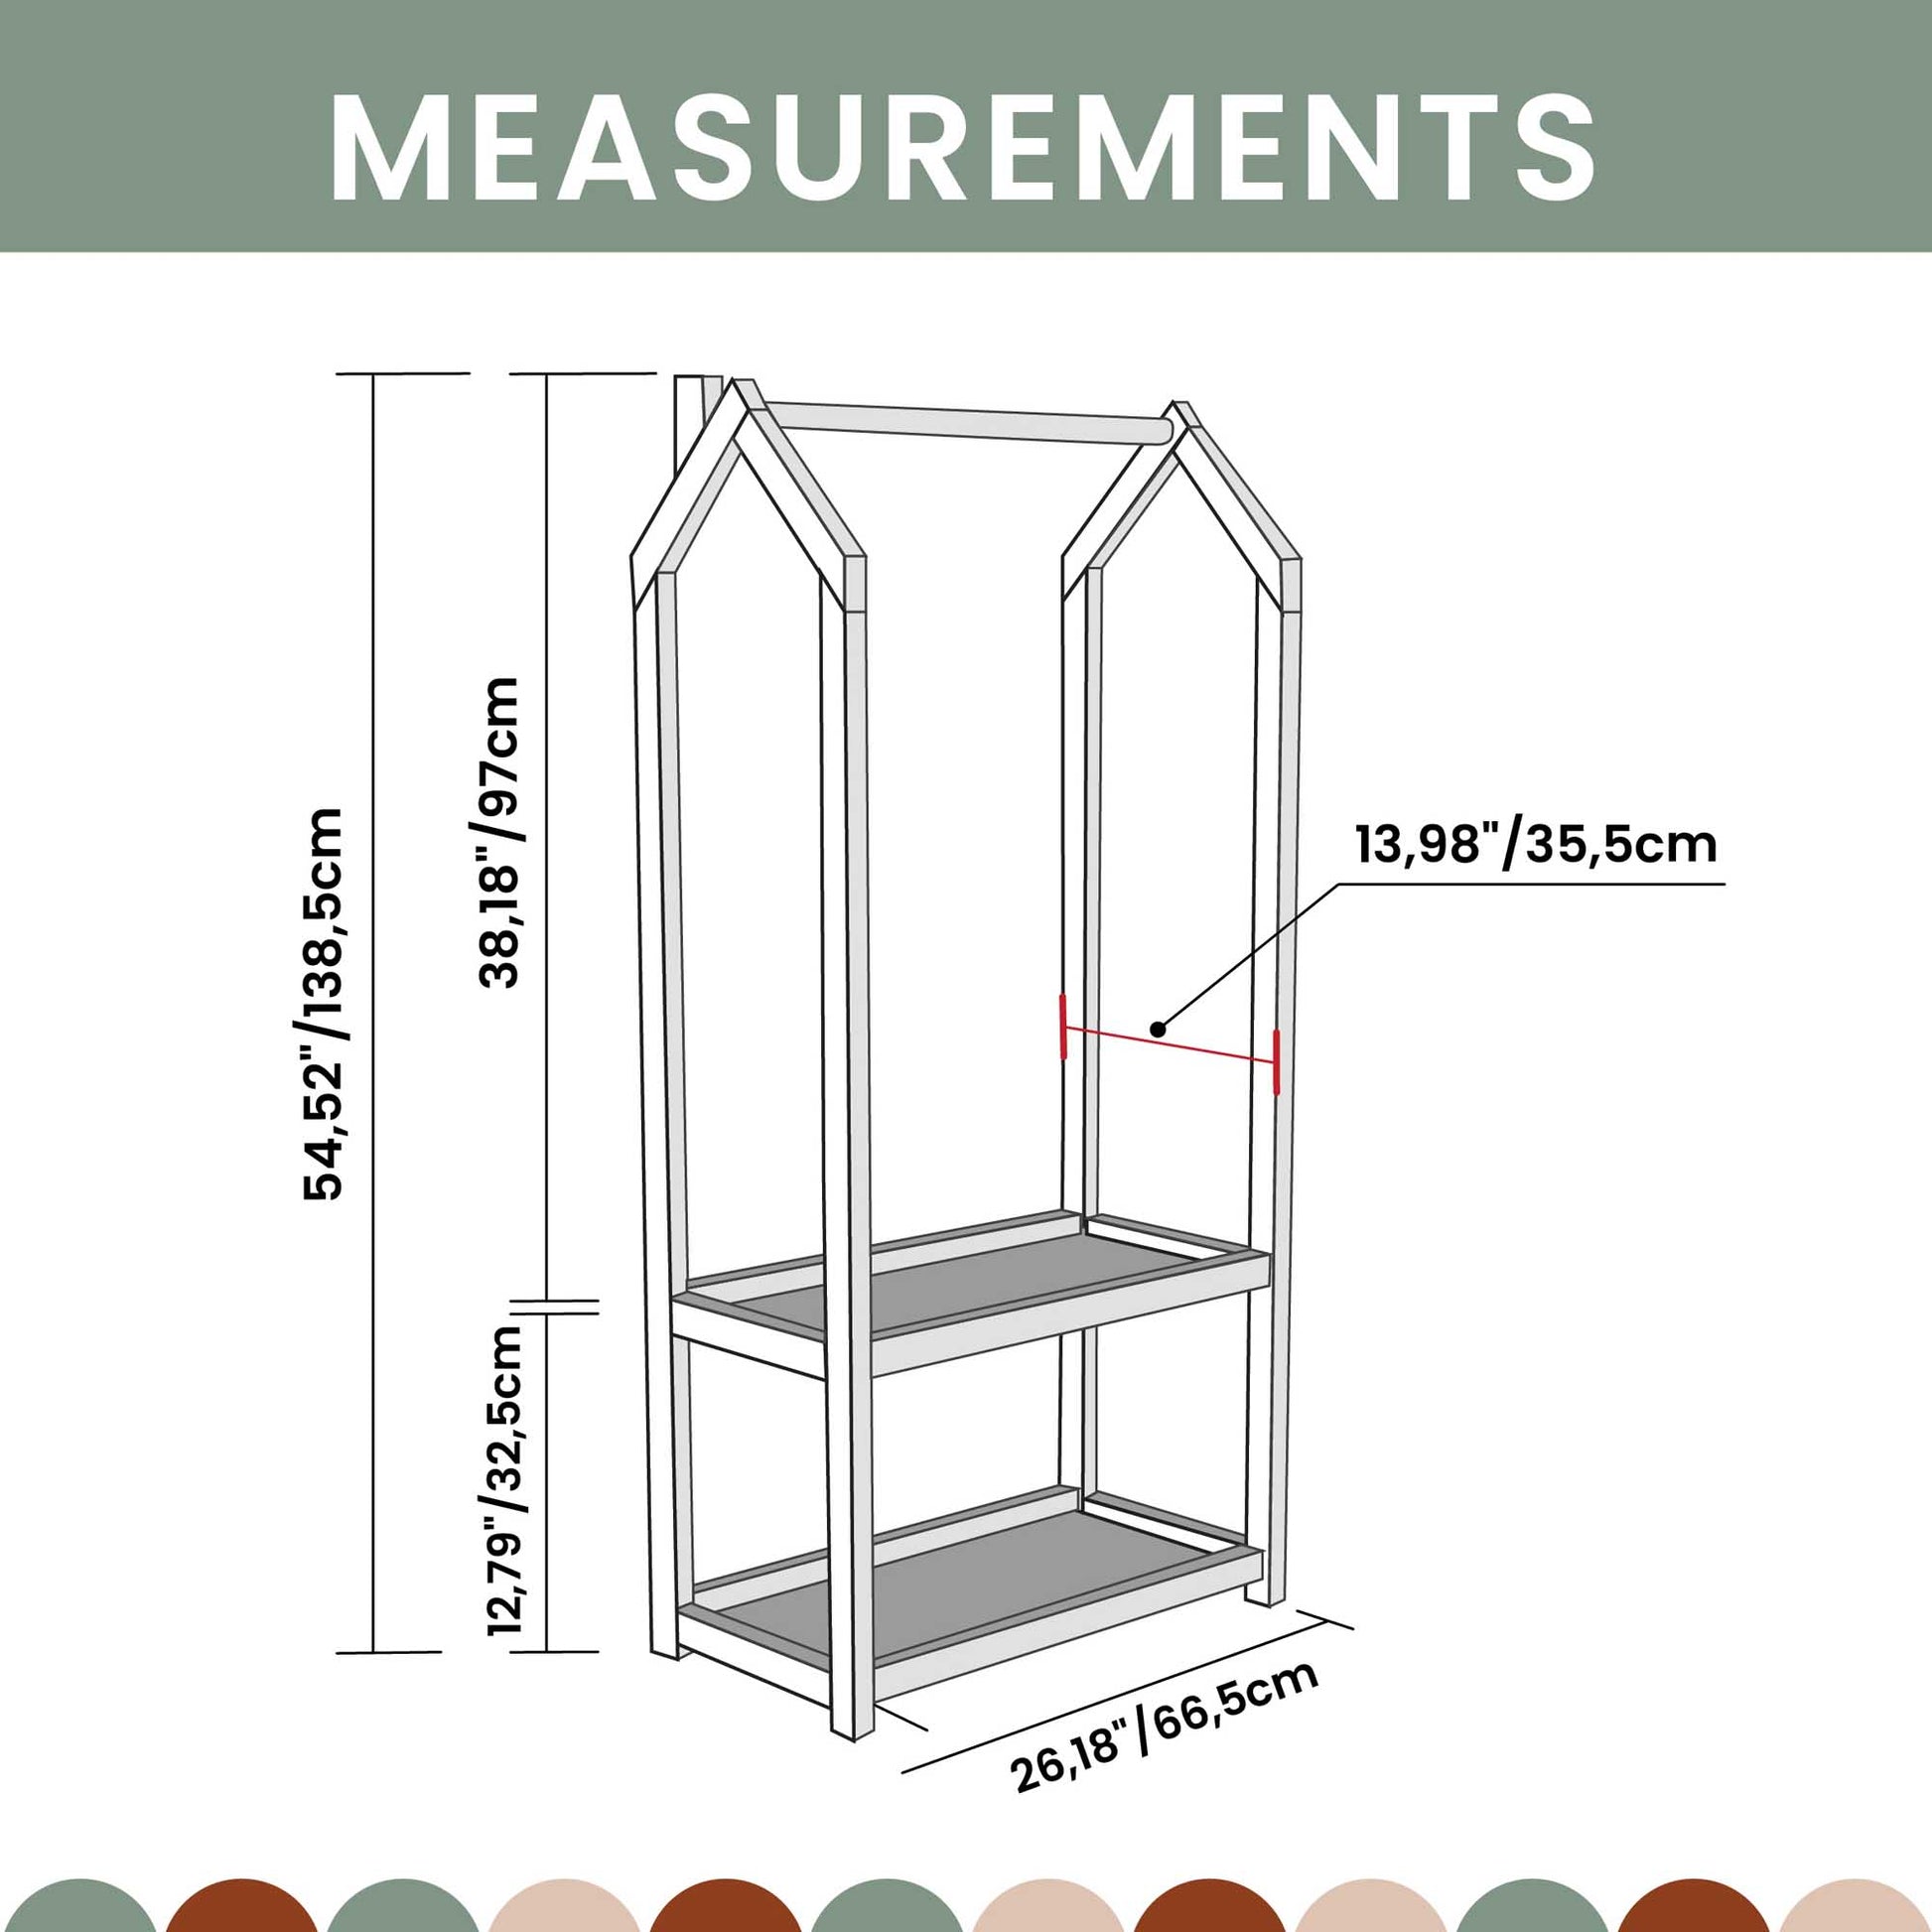 Measurements for a Sweet Home From Wood Montessori wardrobe shop display rack.